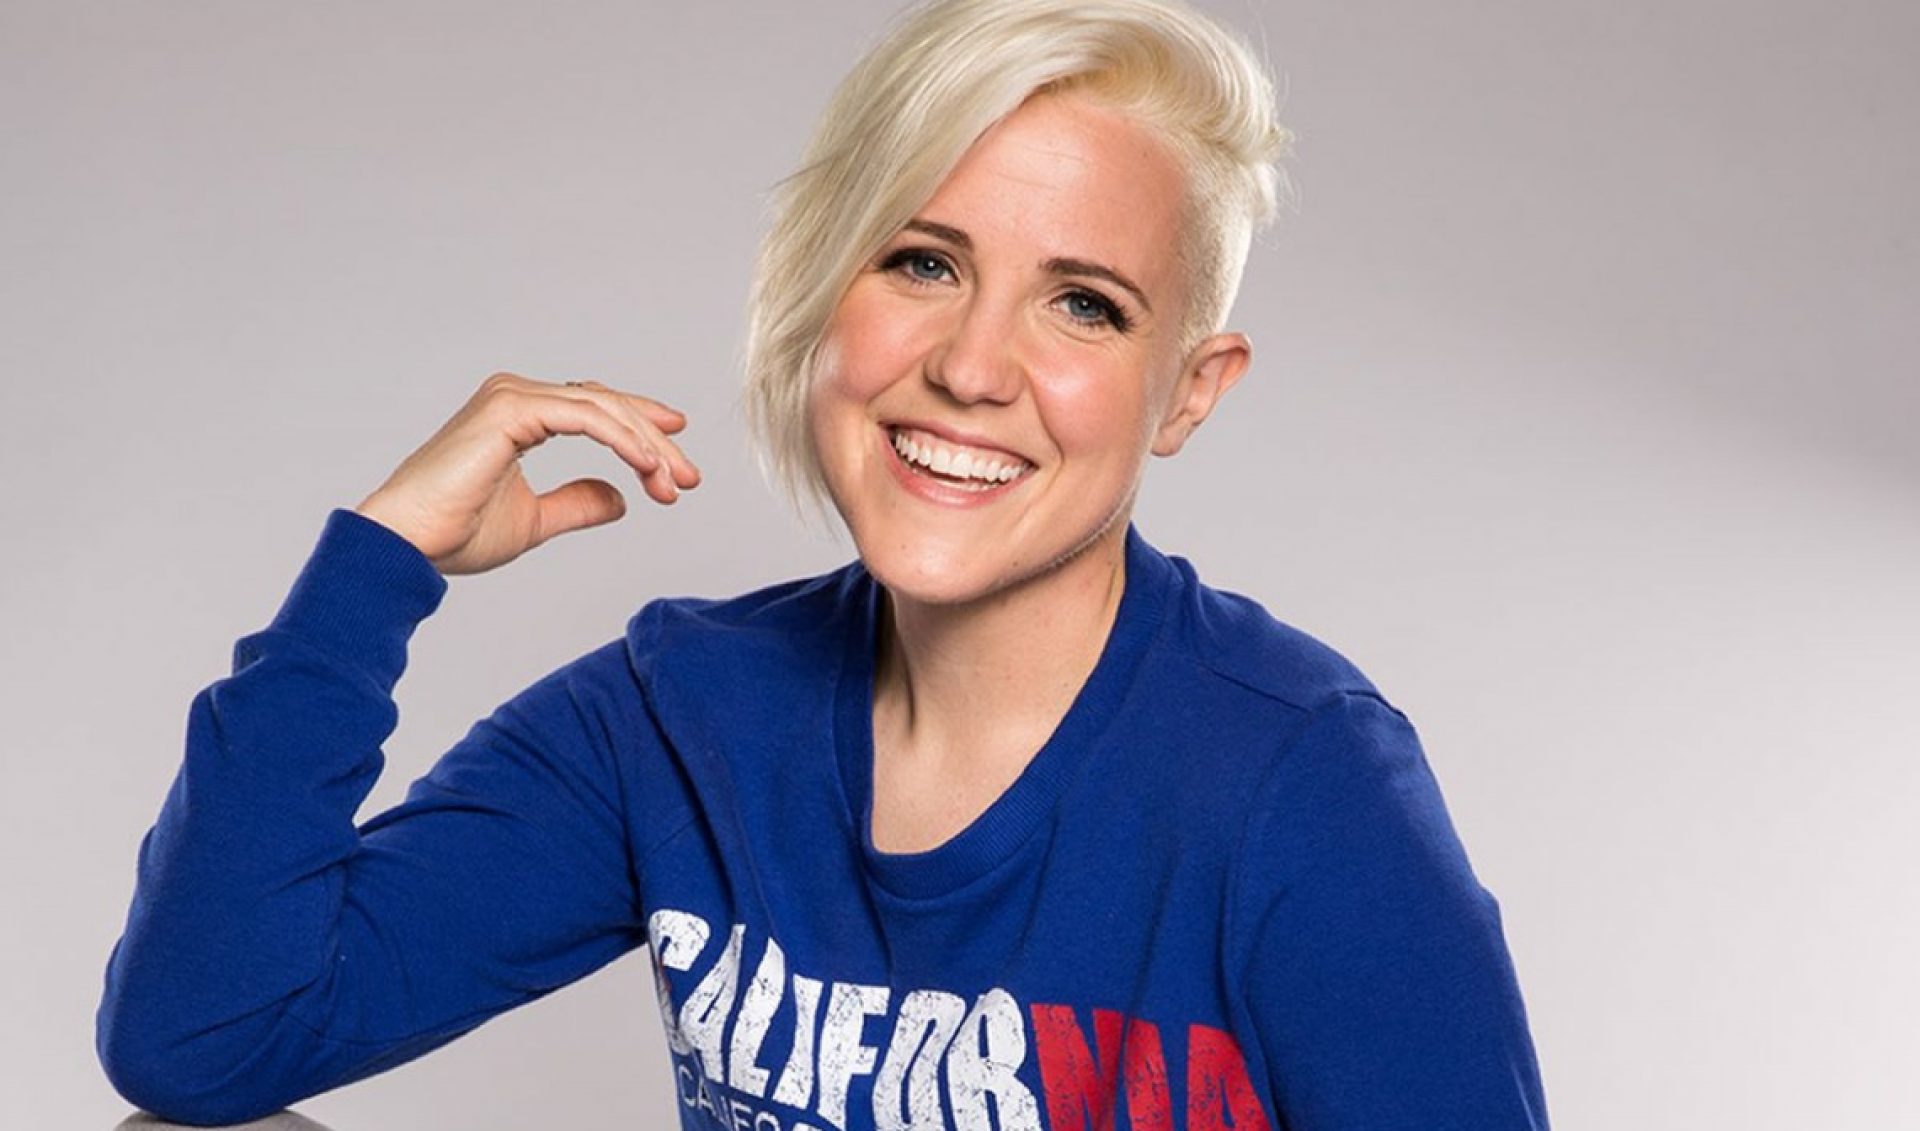 Hannah Hart, GLAAD To Raise $50,000 For LGBTQ+ Youth With ‘Pride Live’ Variety Show